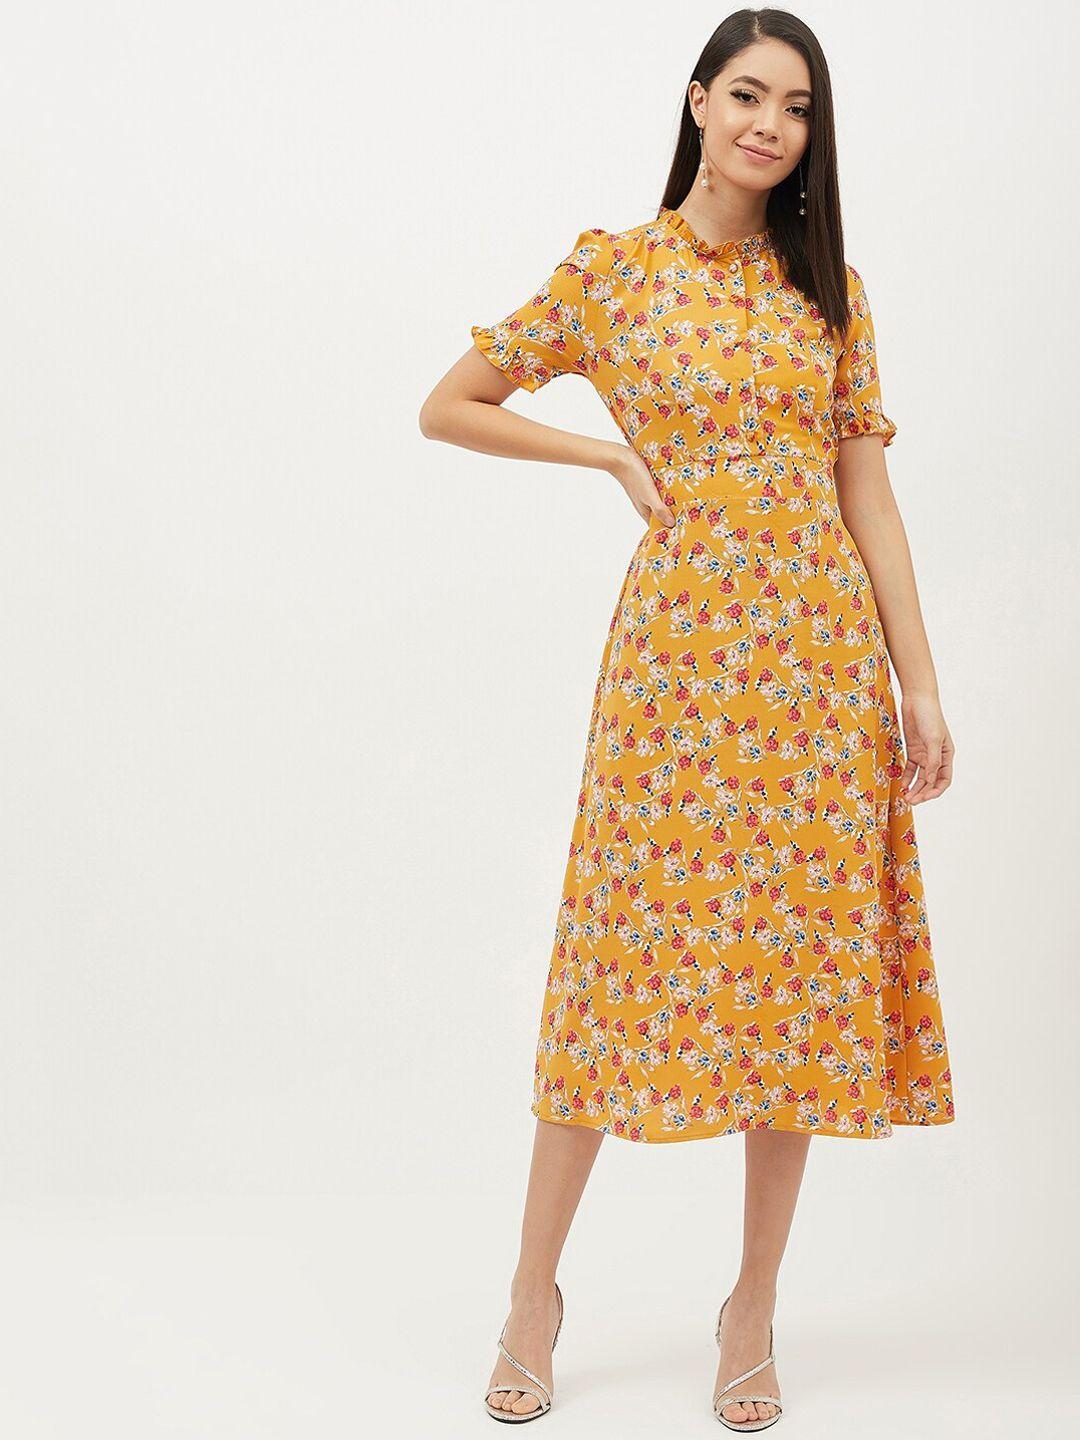 harpa-women-mustard-yellow-printed-fit-and-flare-dress